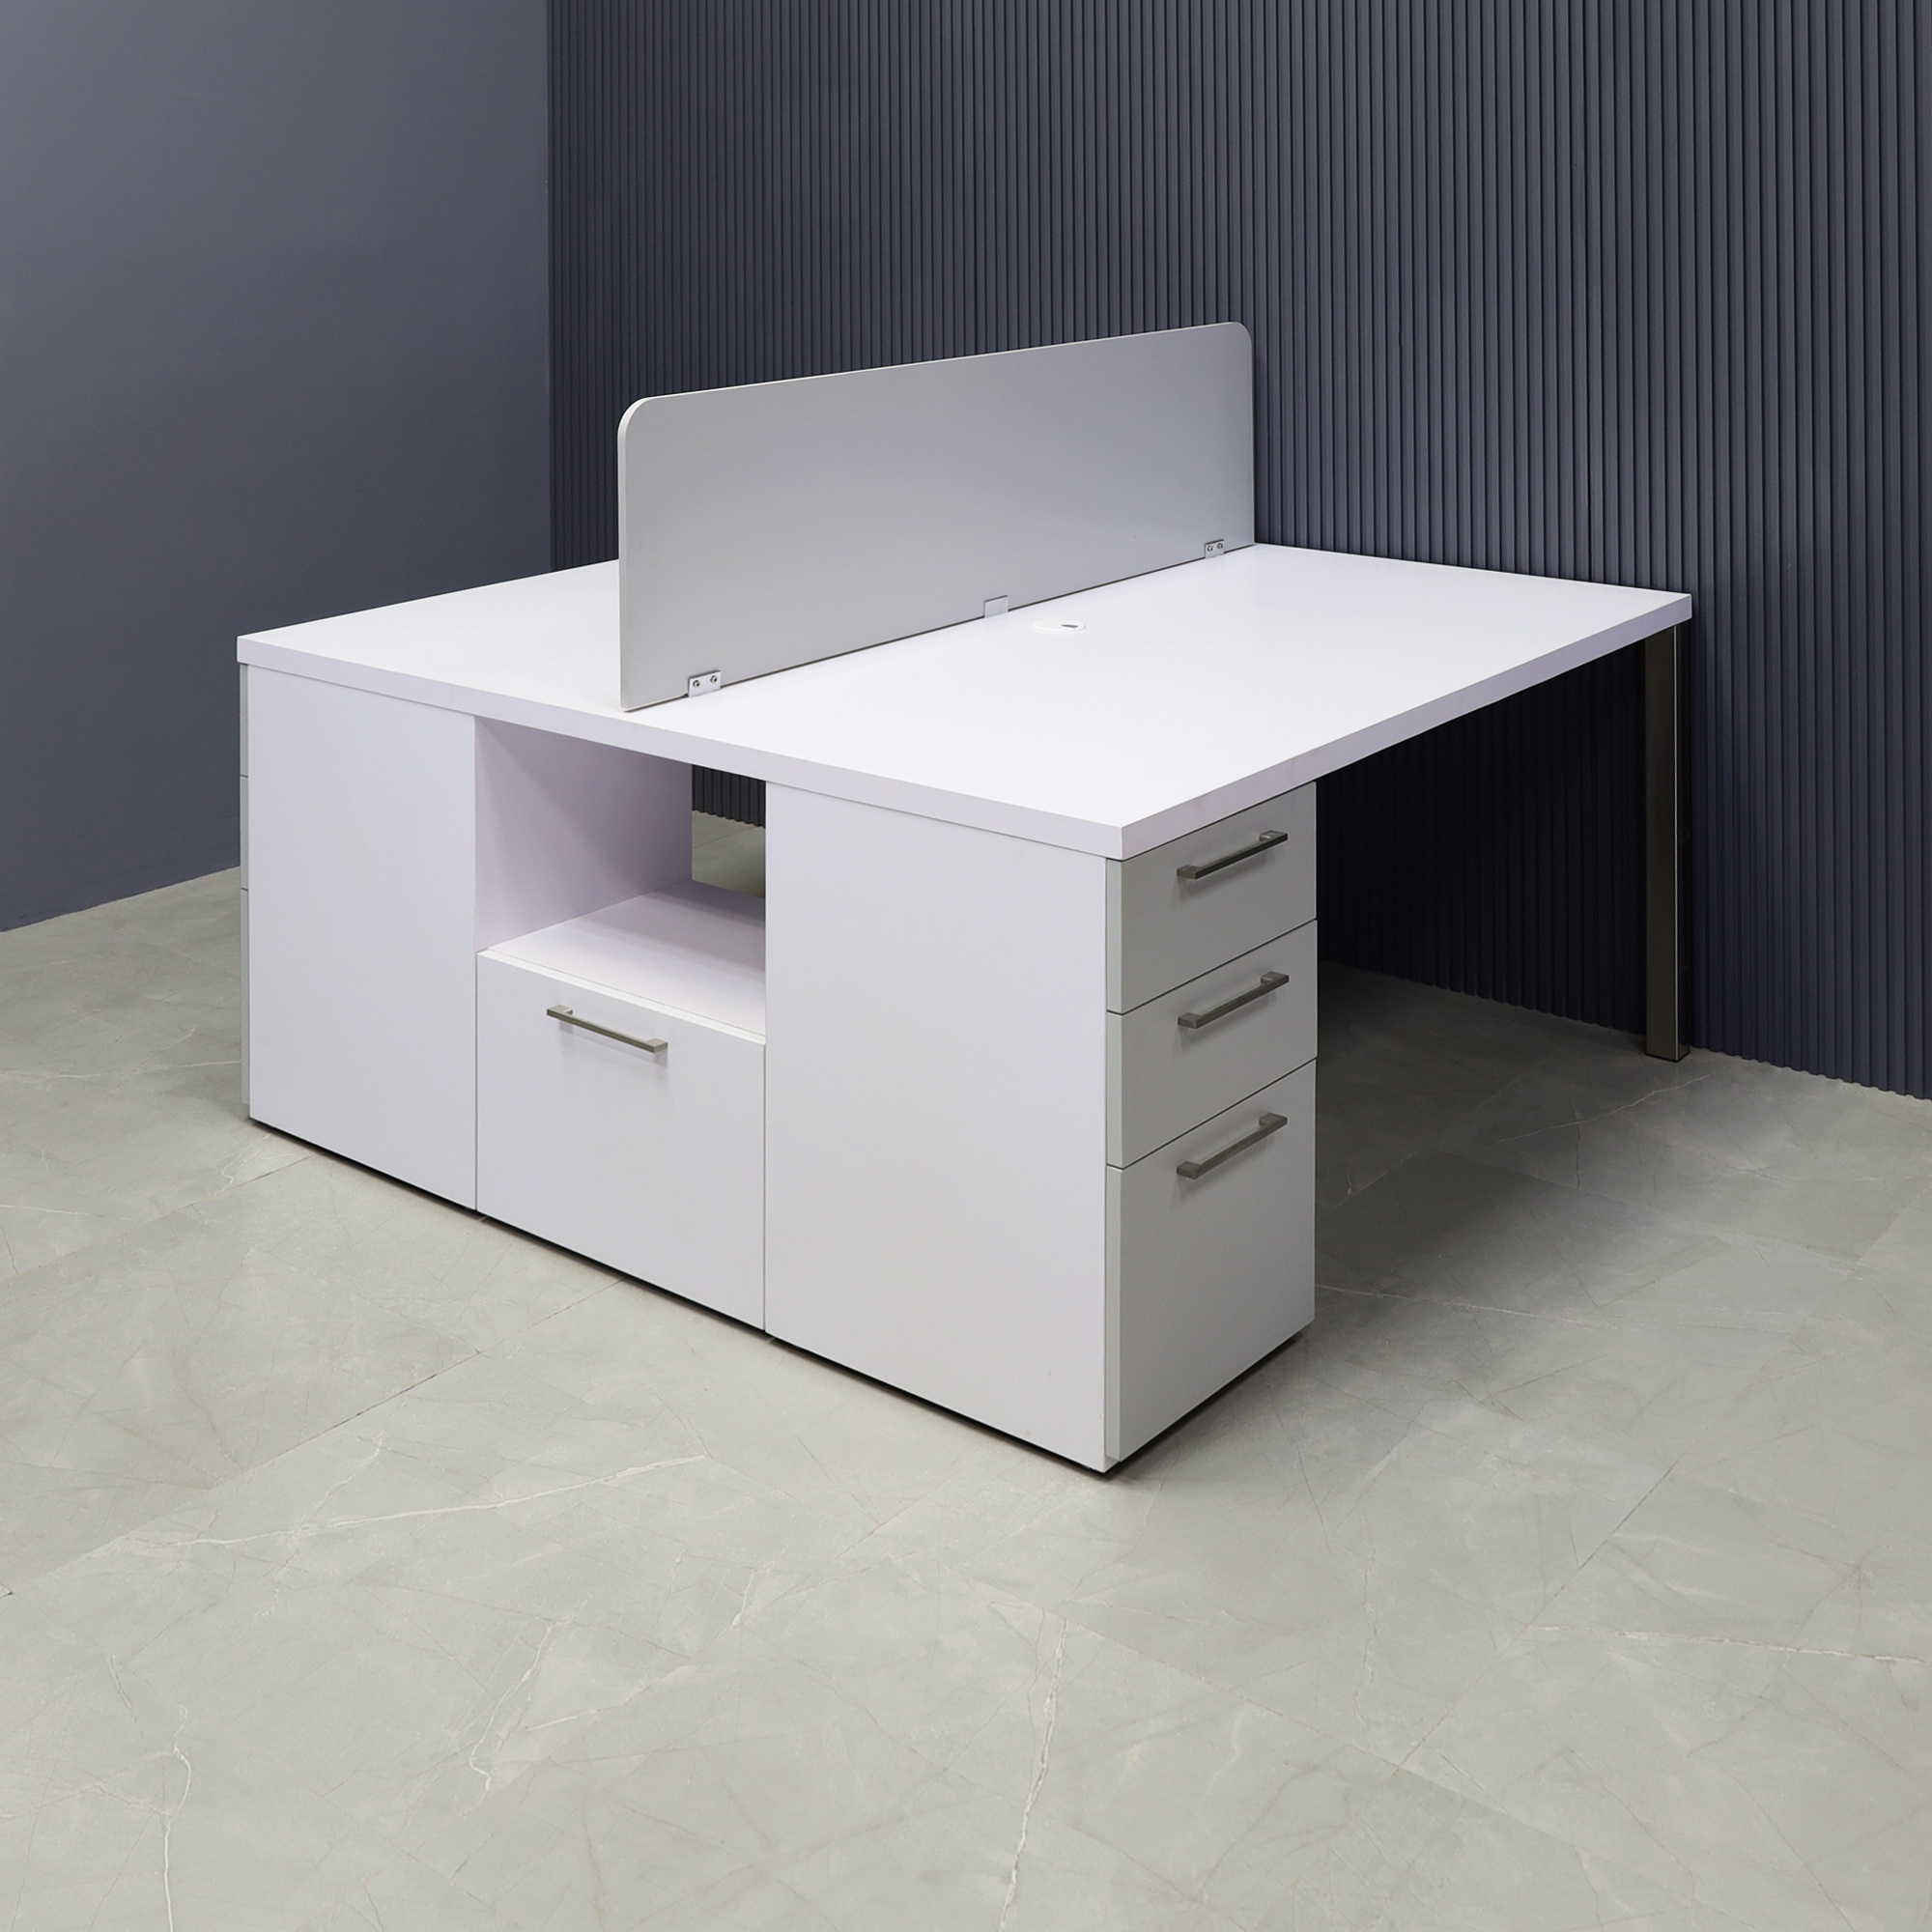 60X60 inches Dallas Workstation With Storage in white matte laminate top & storages, fog gray laminate divider & front drawers, with brushed stainless legs shown here.